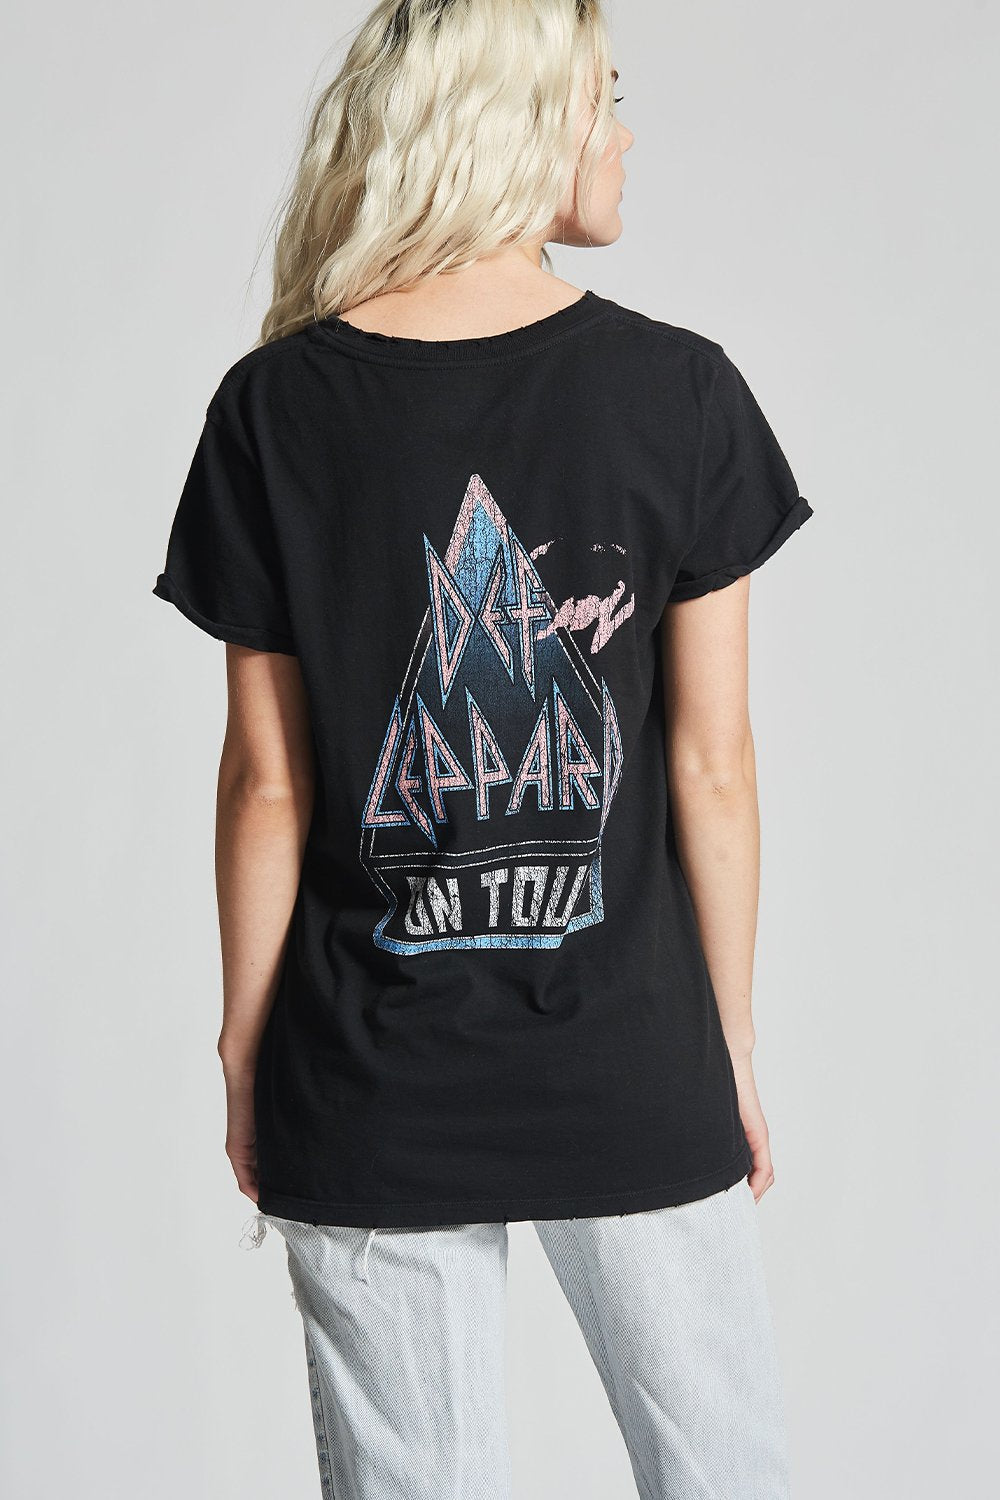 Def Leopard Pyromania Tour Graphic Tee Recycled Karma